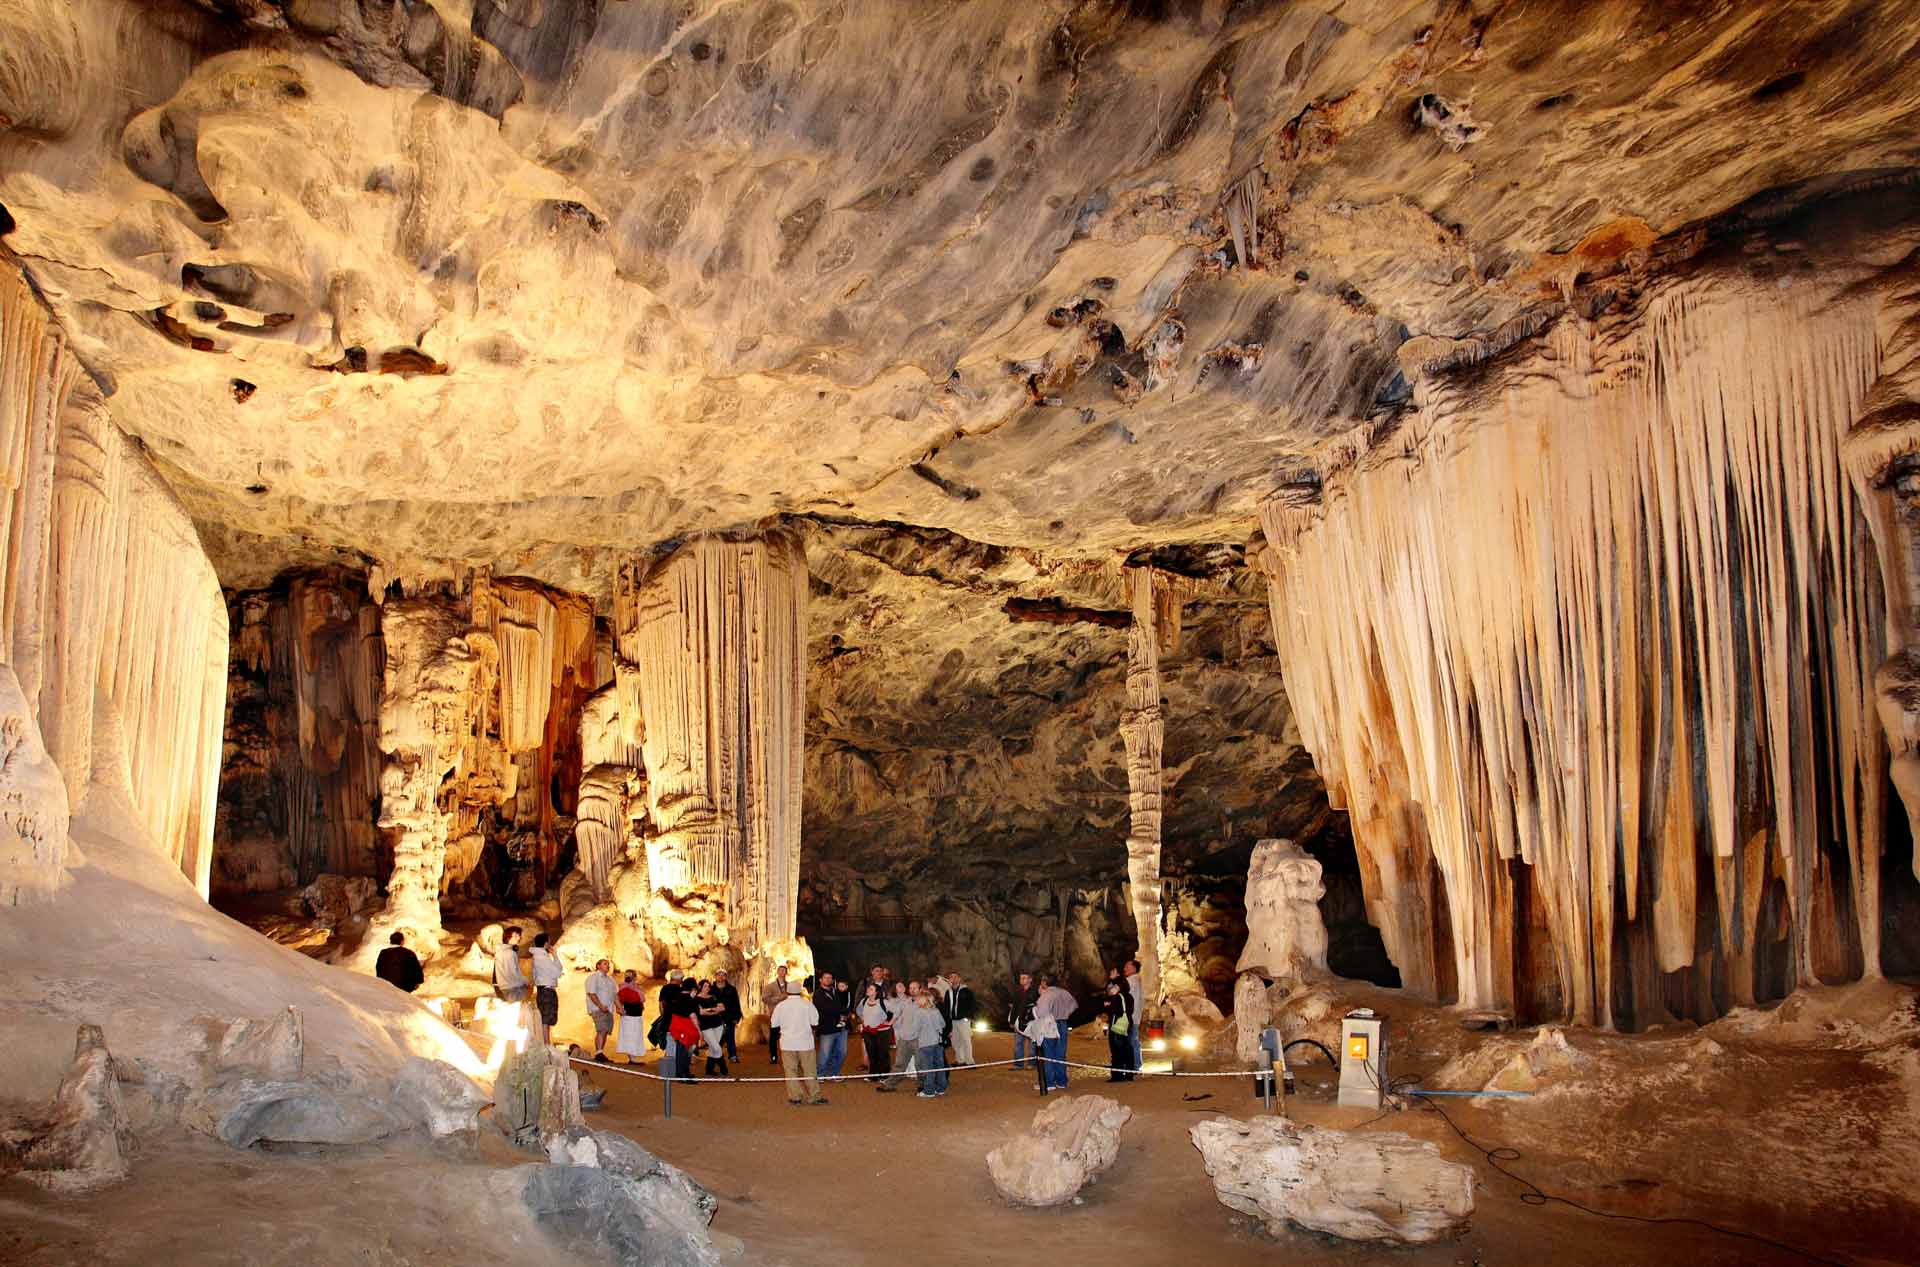 Group of tourists visiting Cango Caves in Oudtshoorn